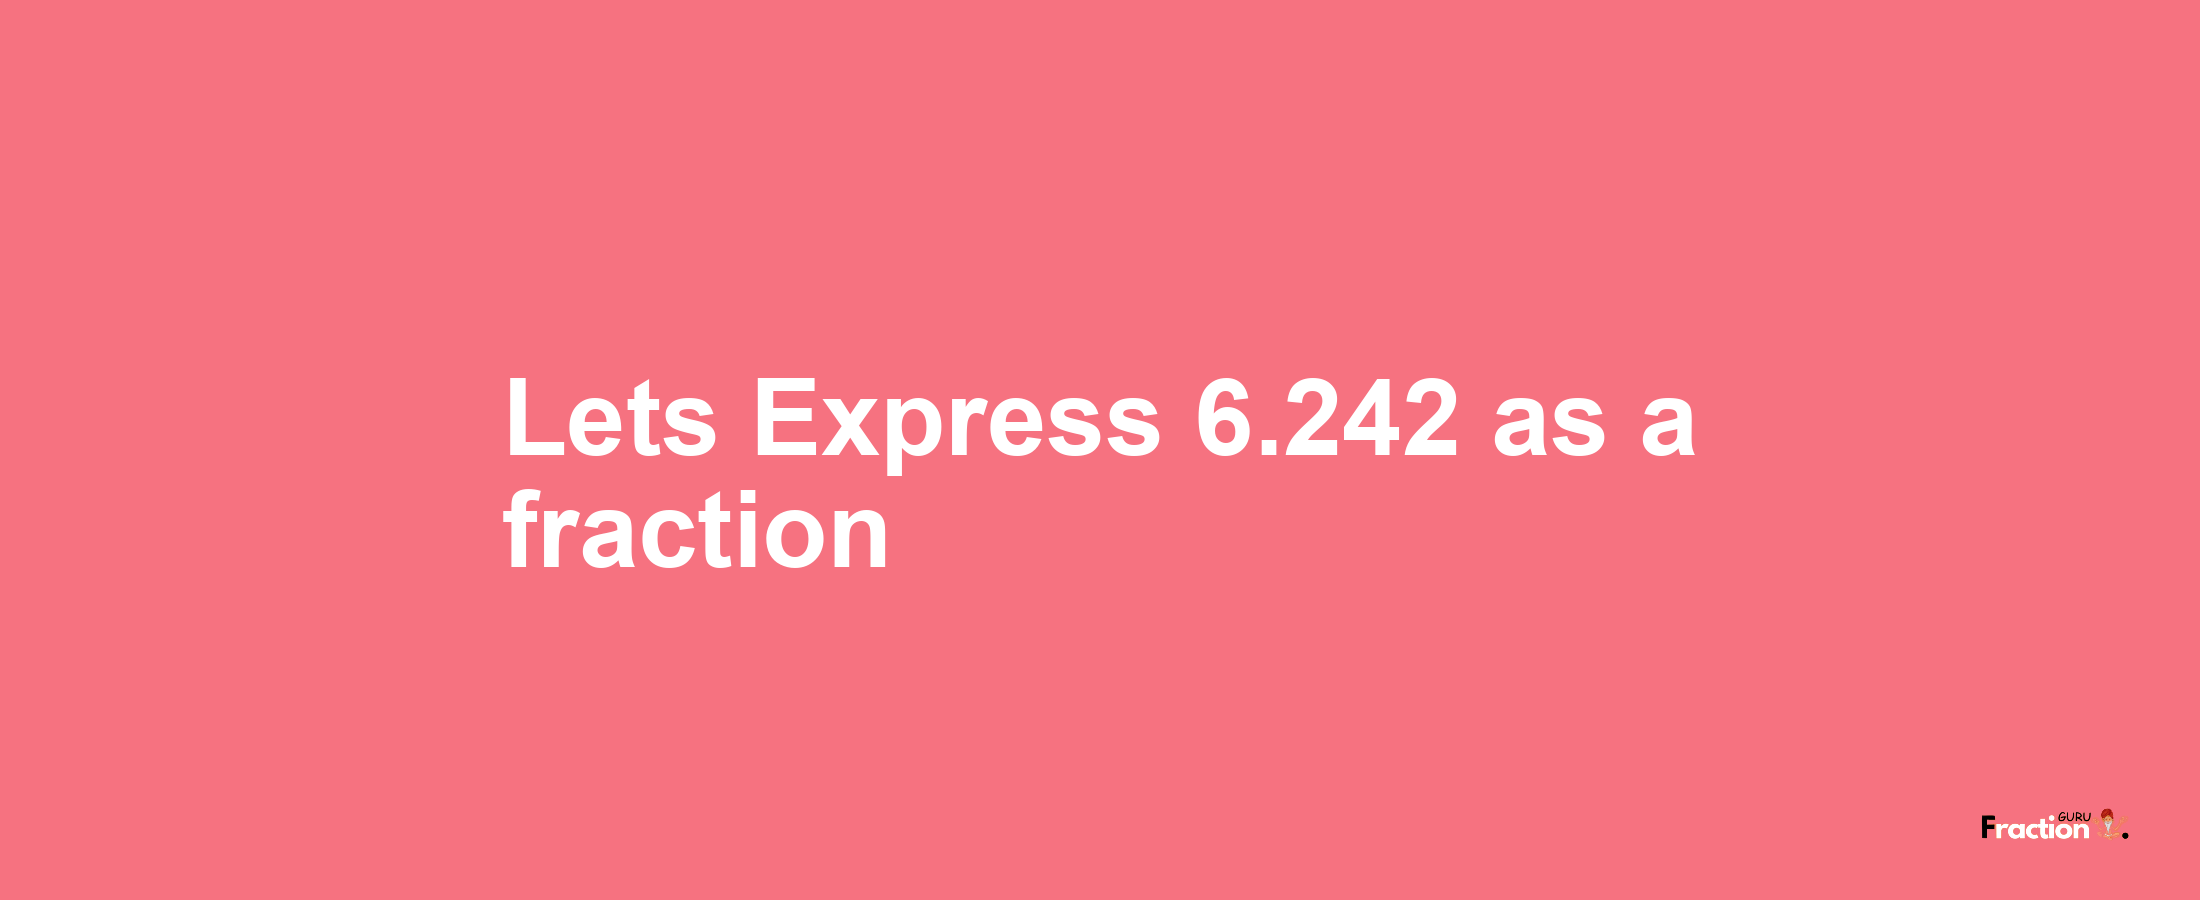 Lets Express 6.242 as afraction